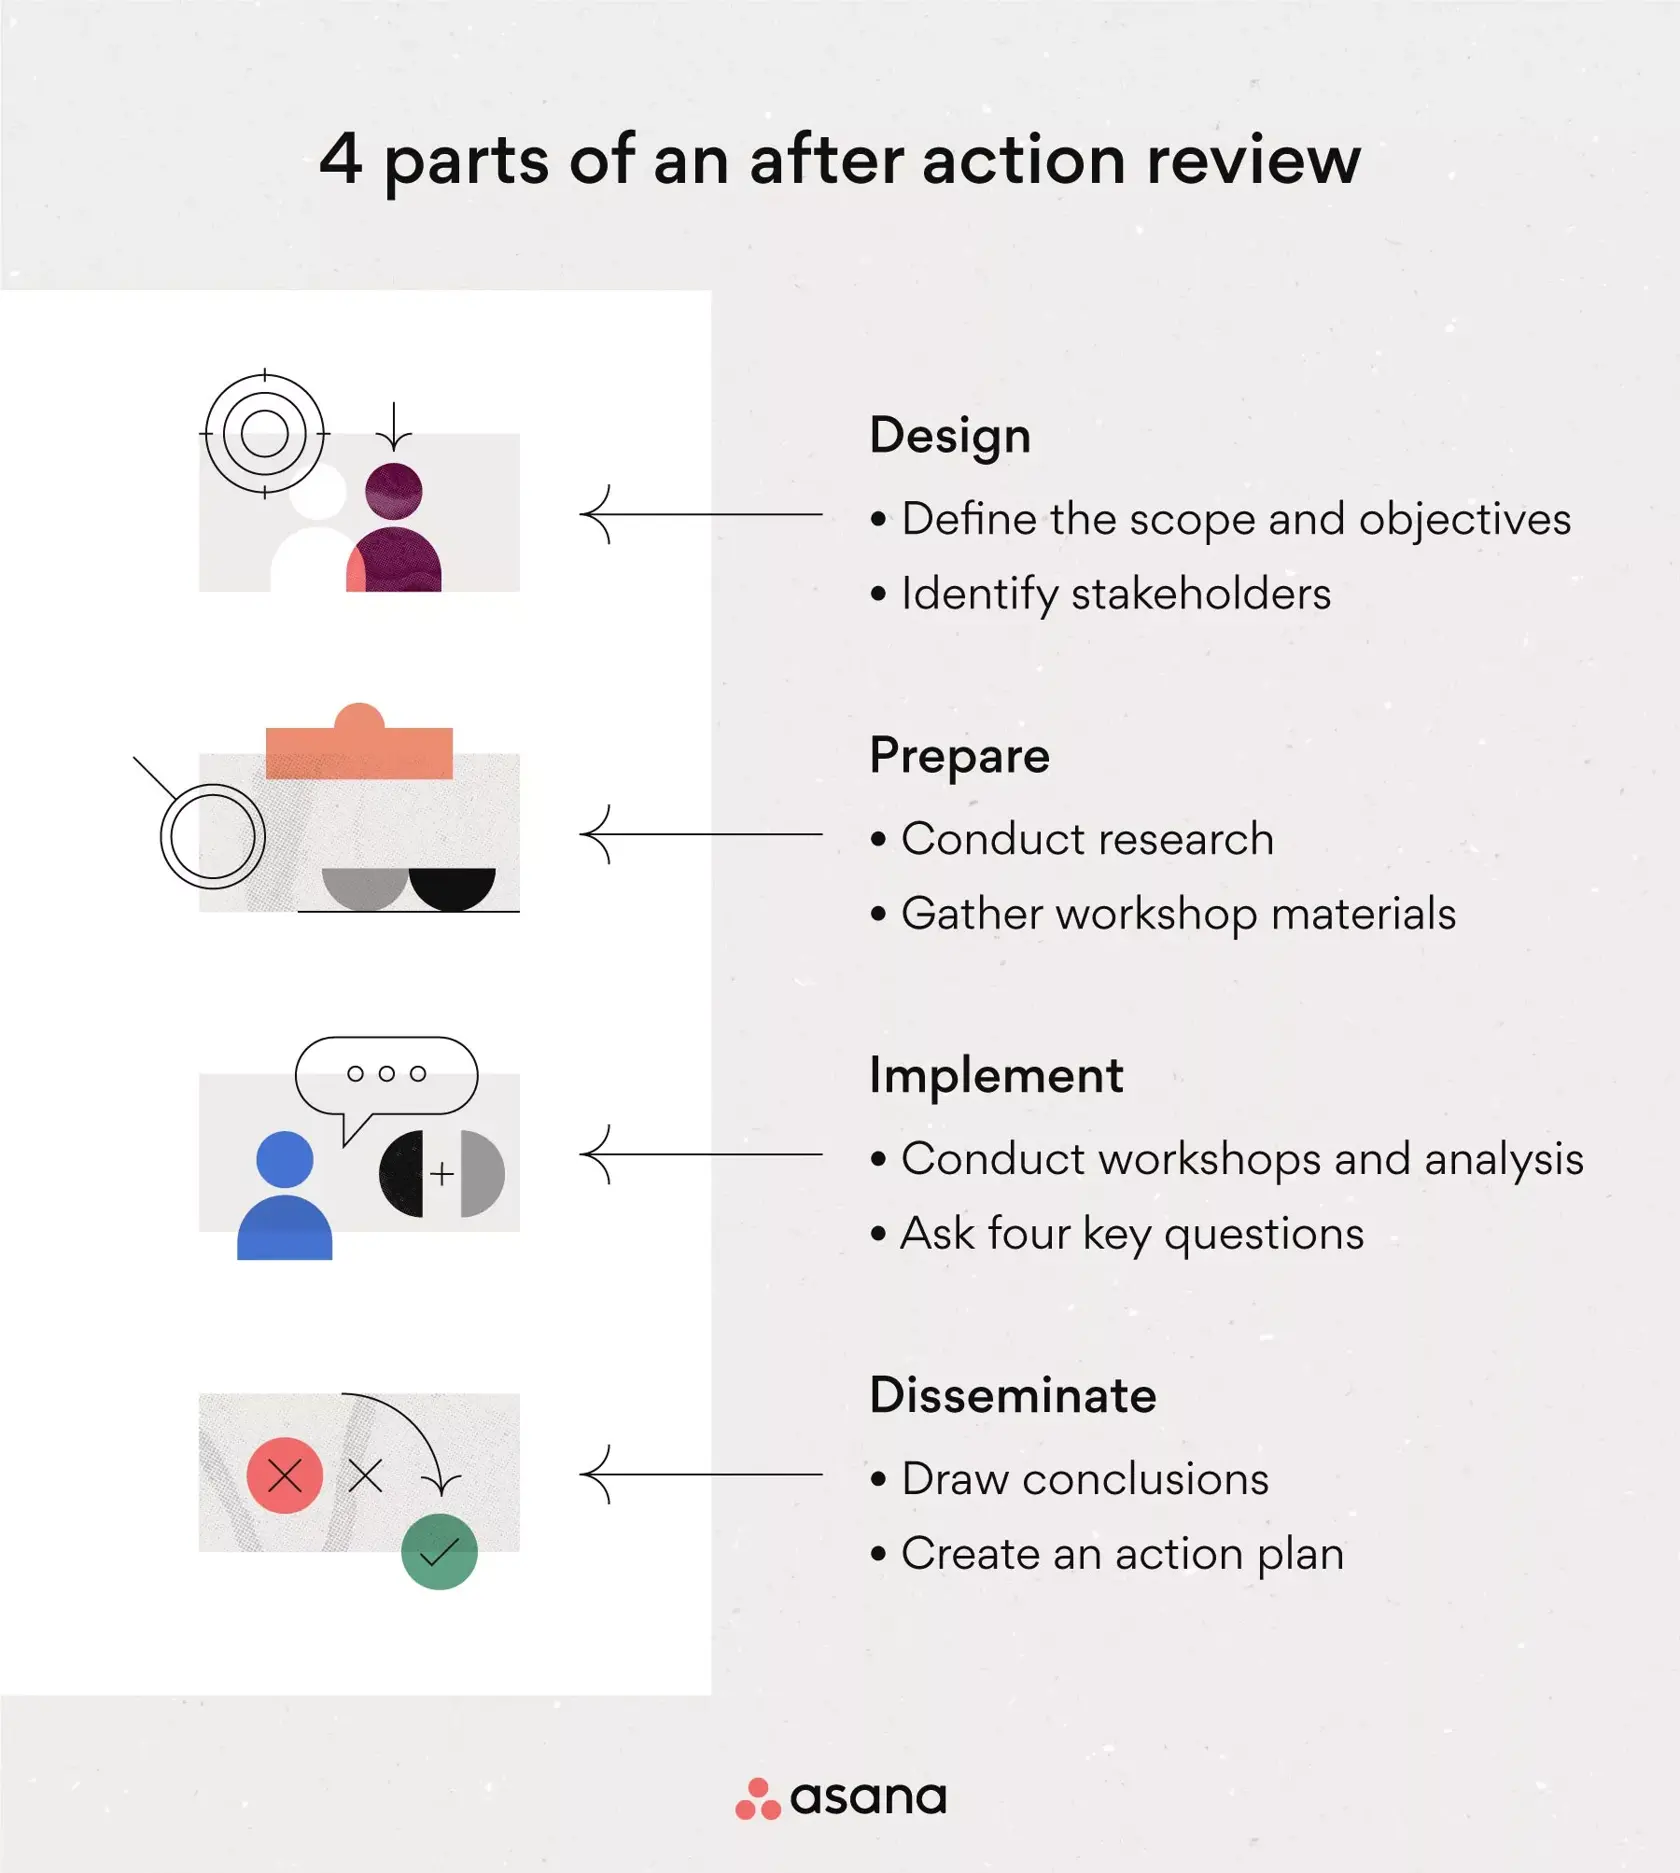 [inline illustration] 4 parts of an after action review (infographic)